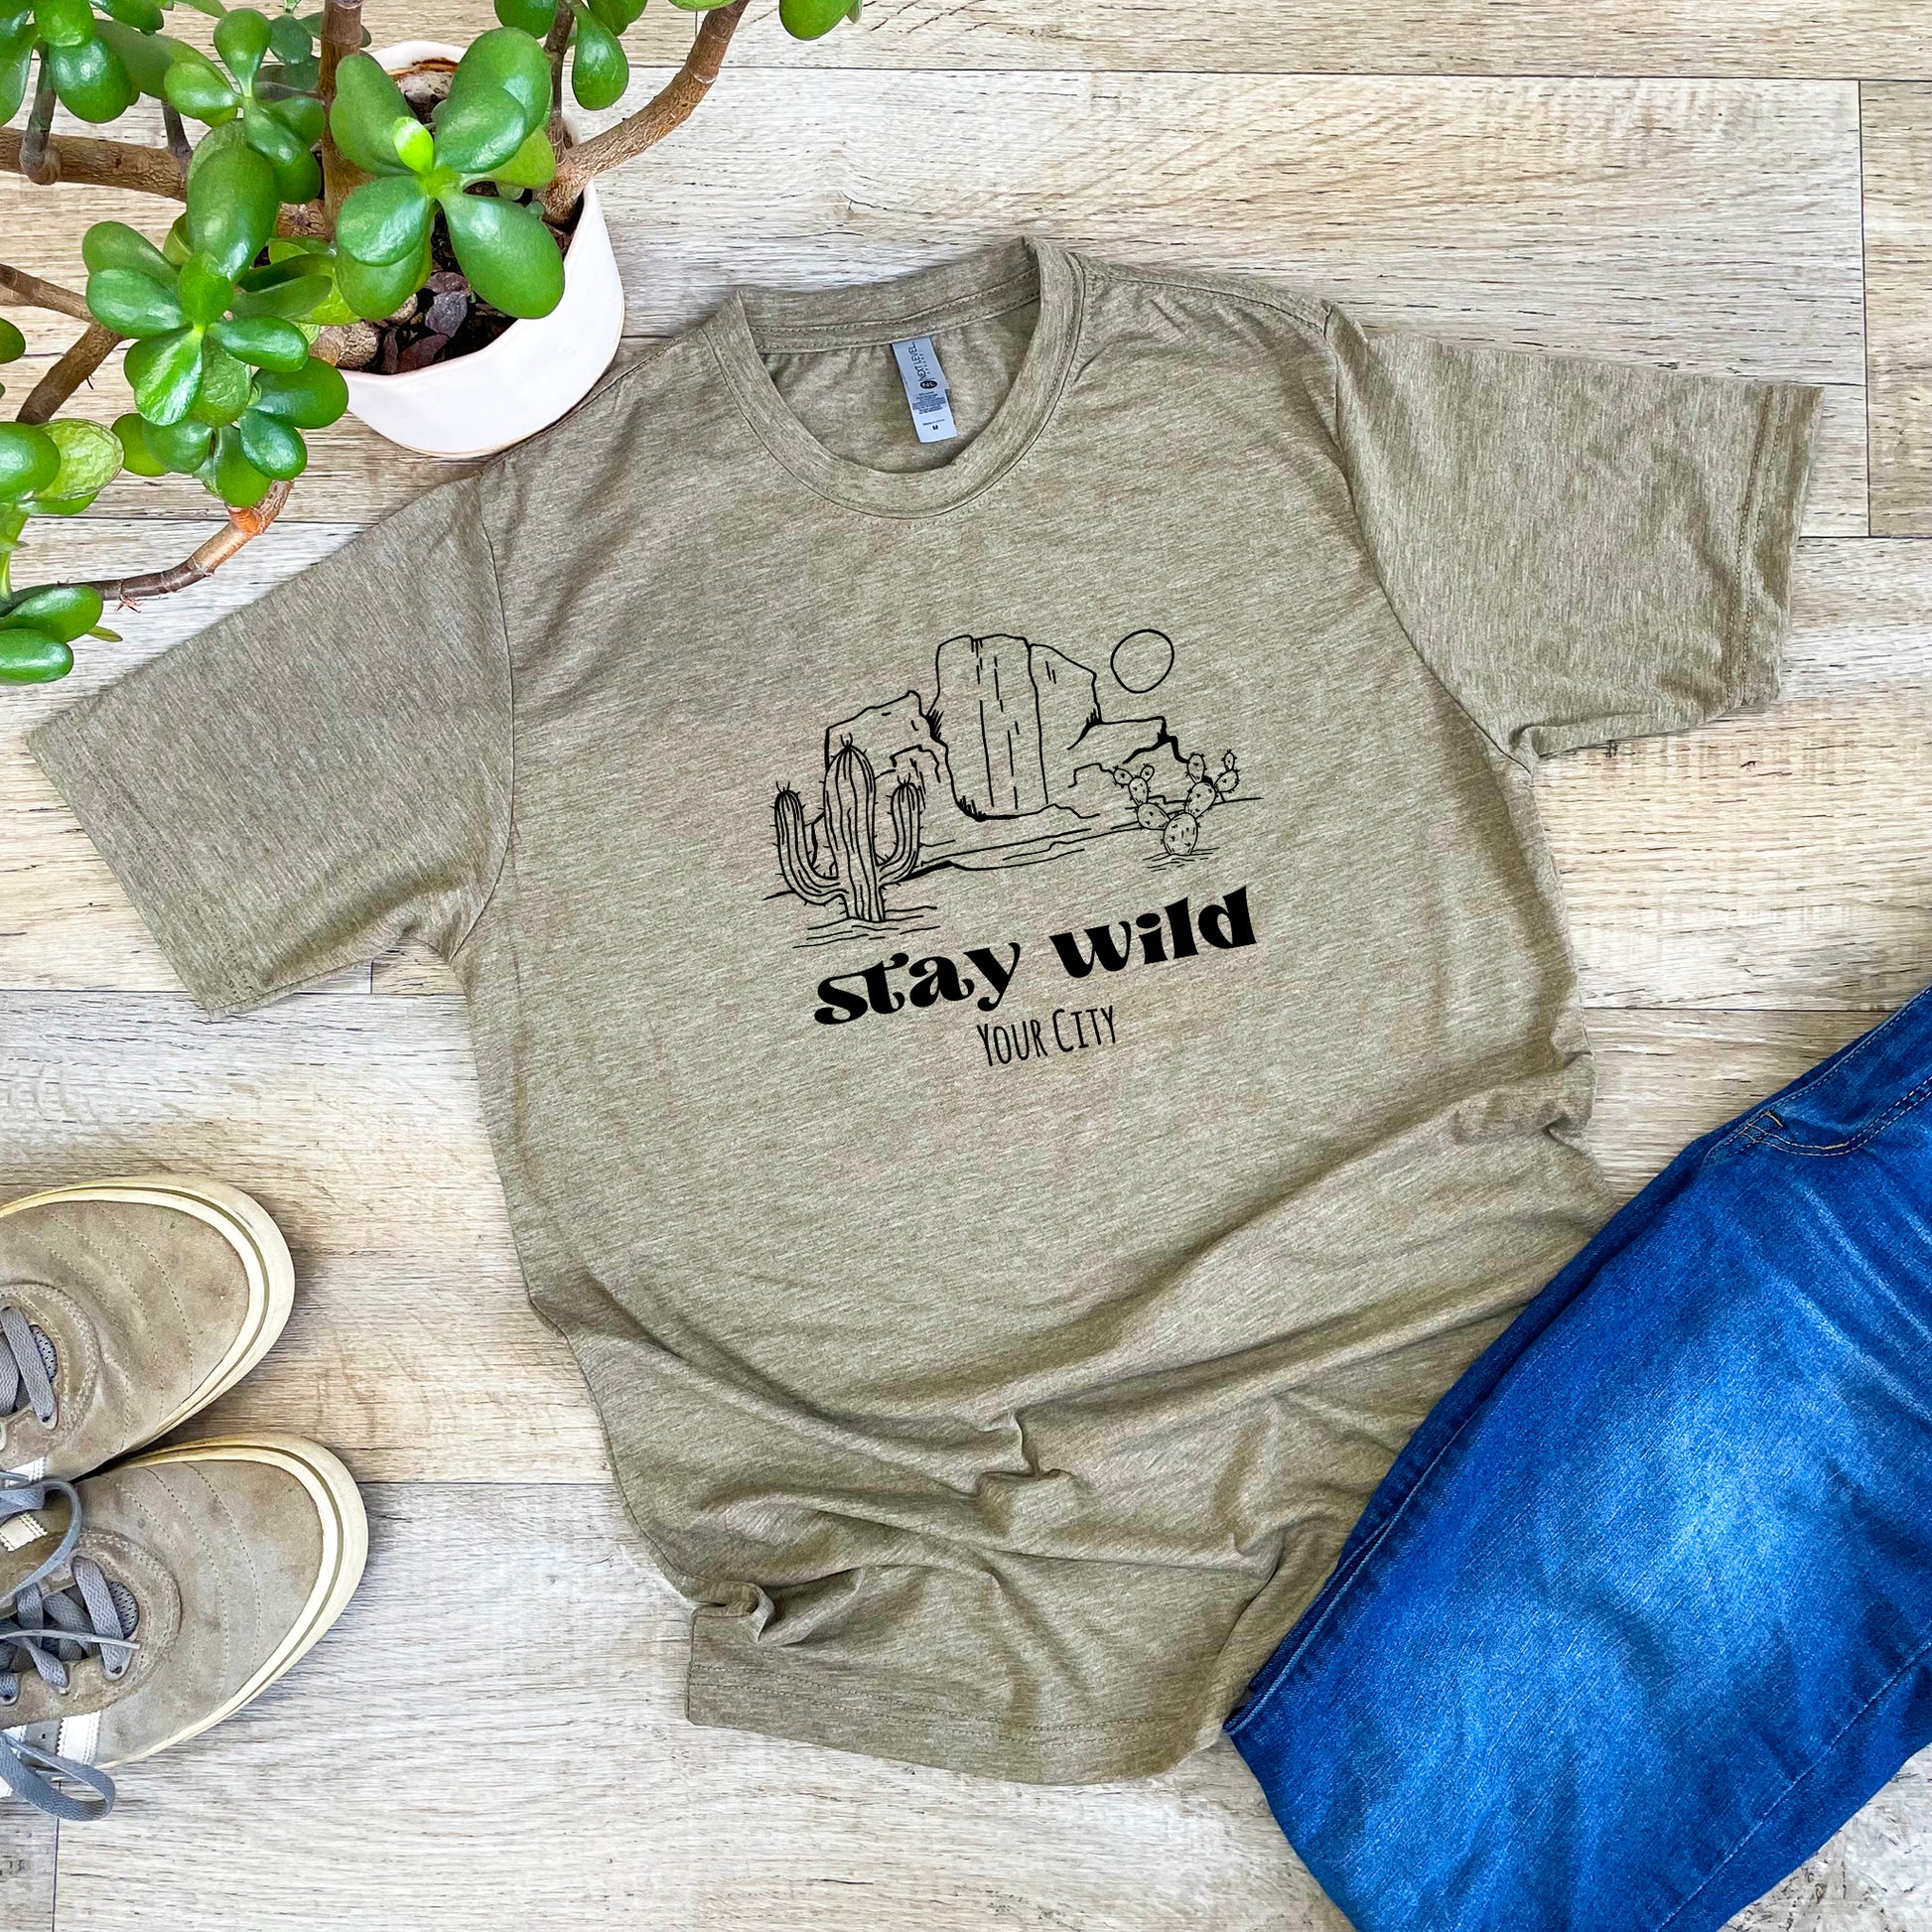 a t - shirt that says stay wild on it